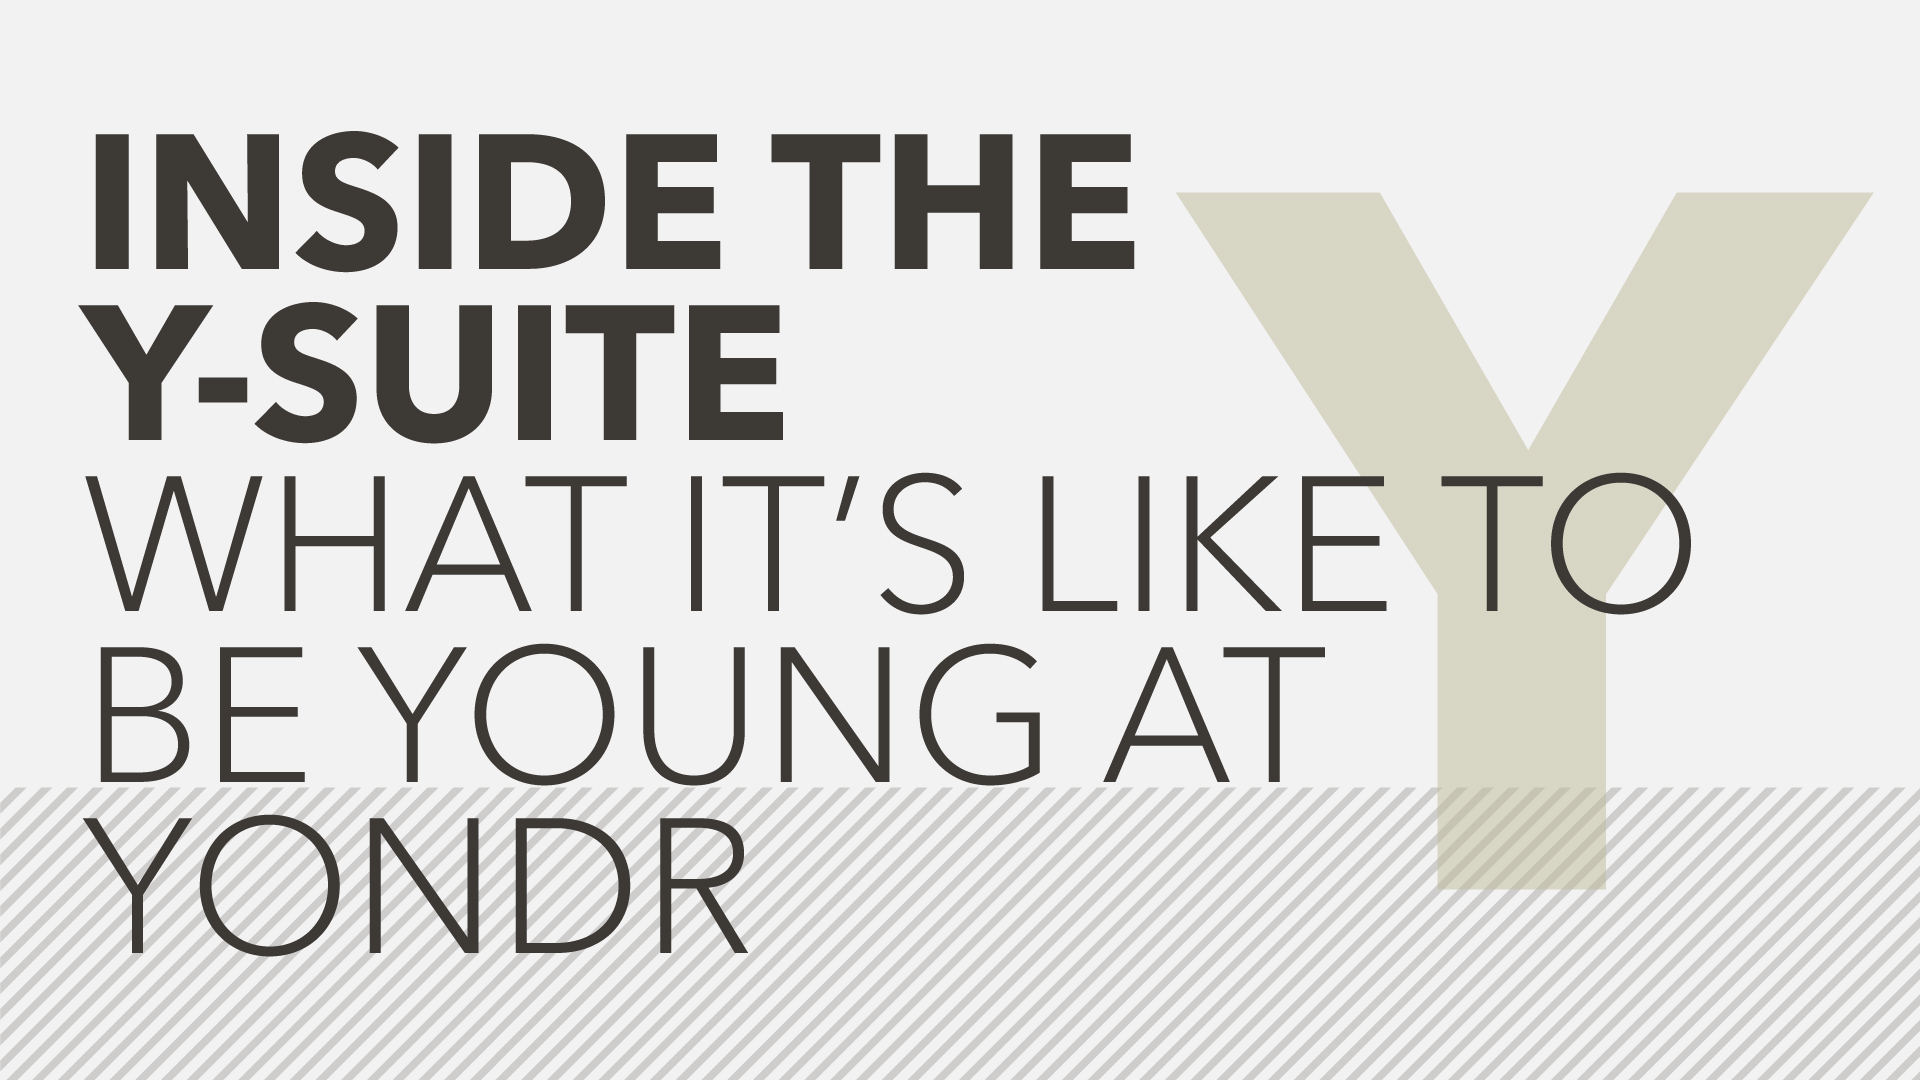 Inside the Y-Suite: what it’s like to be young at Yondr